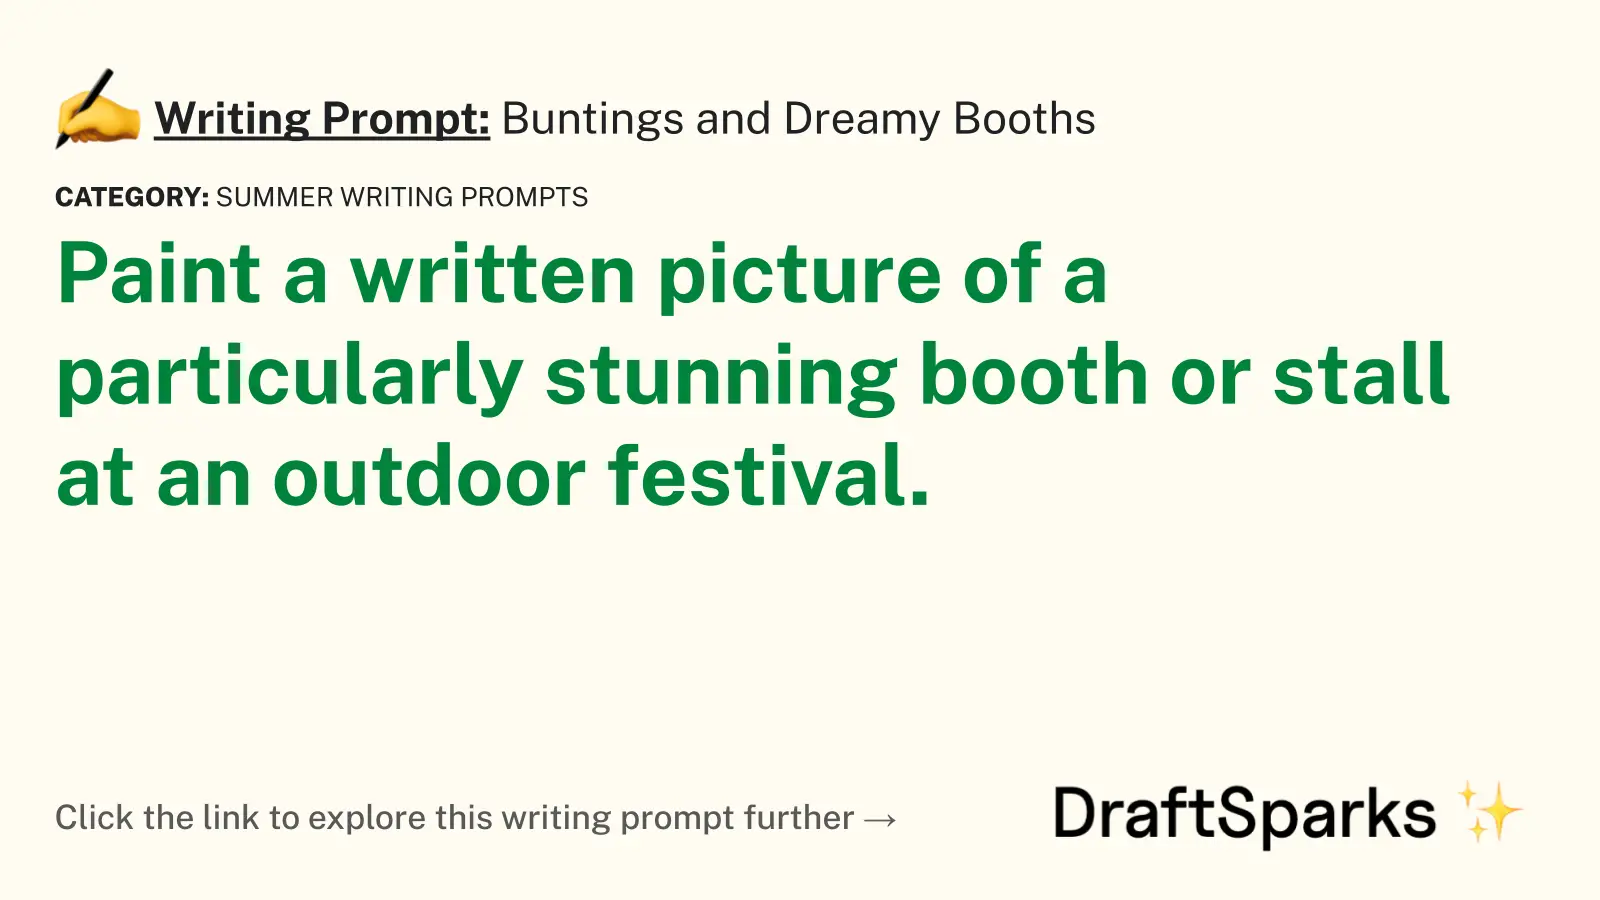 Buntings and Dreamy Booths